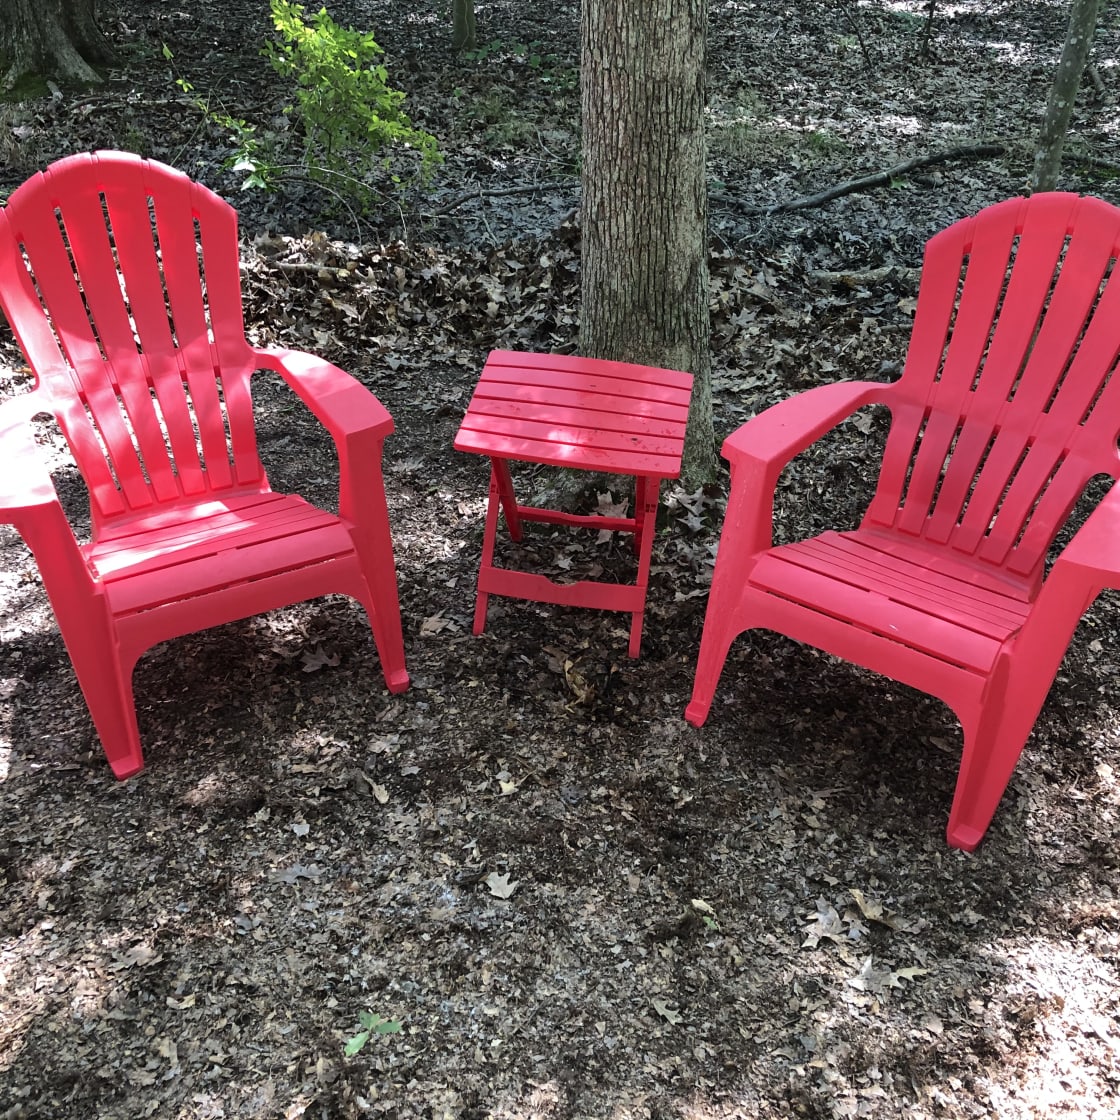 Site includes chairs and table